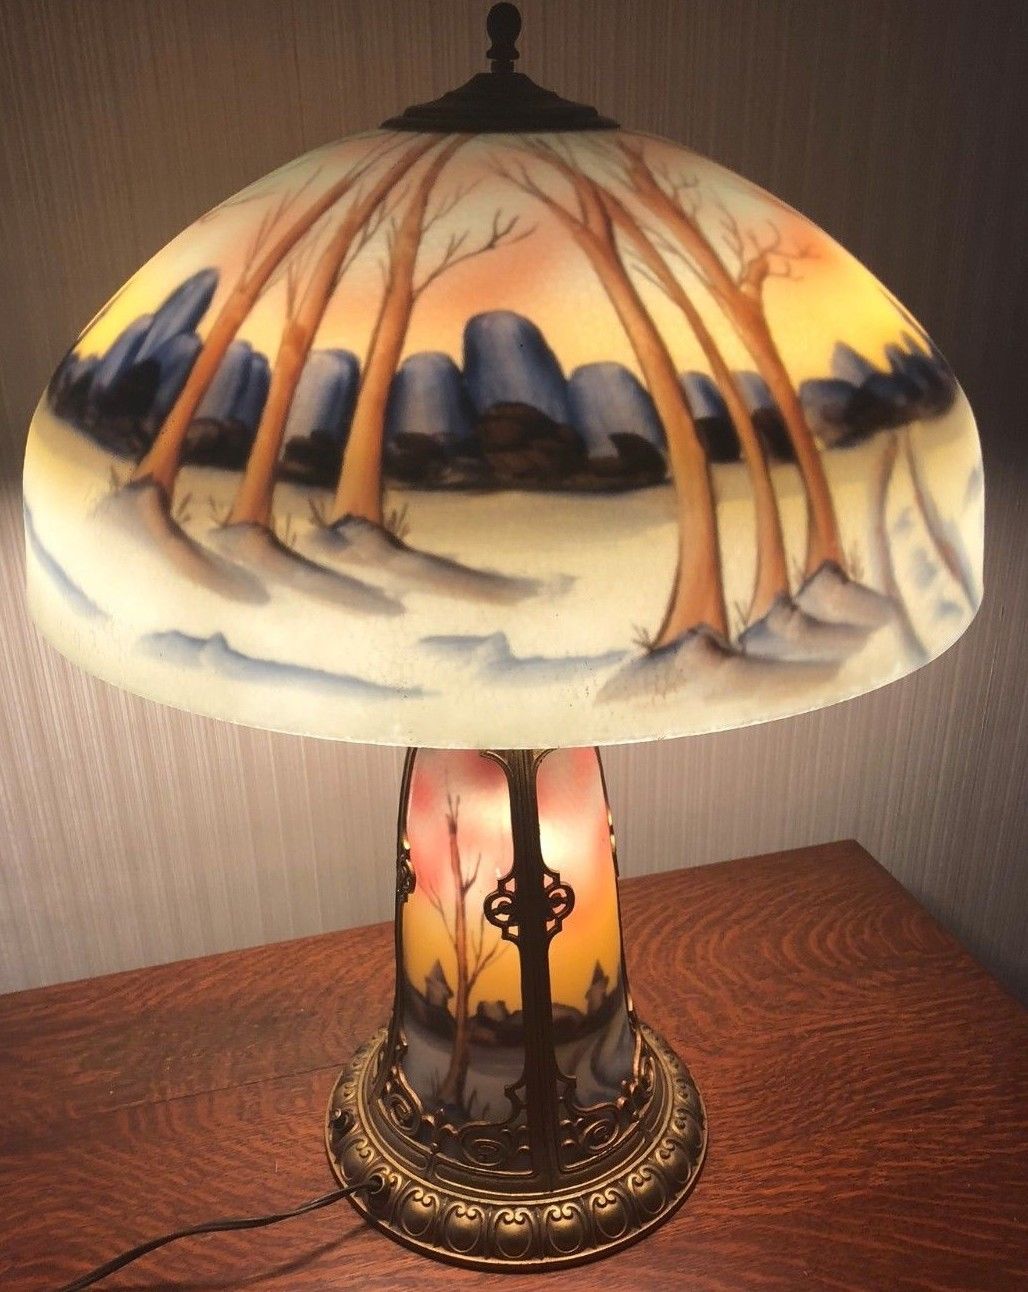 HANDEL CHIPPED ICE REVERSE GLASS PAINTED TABLE LAMP WITH LIGHTED BASE